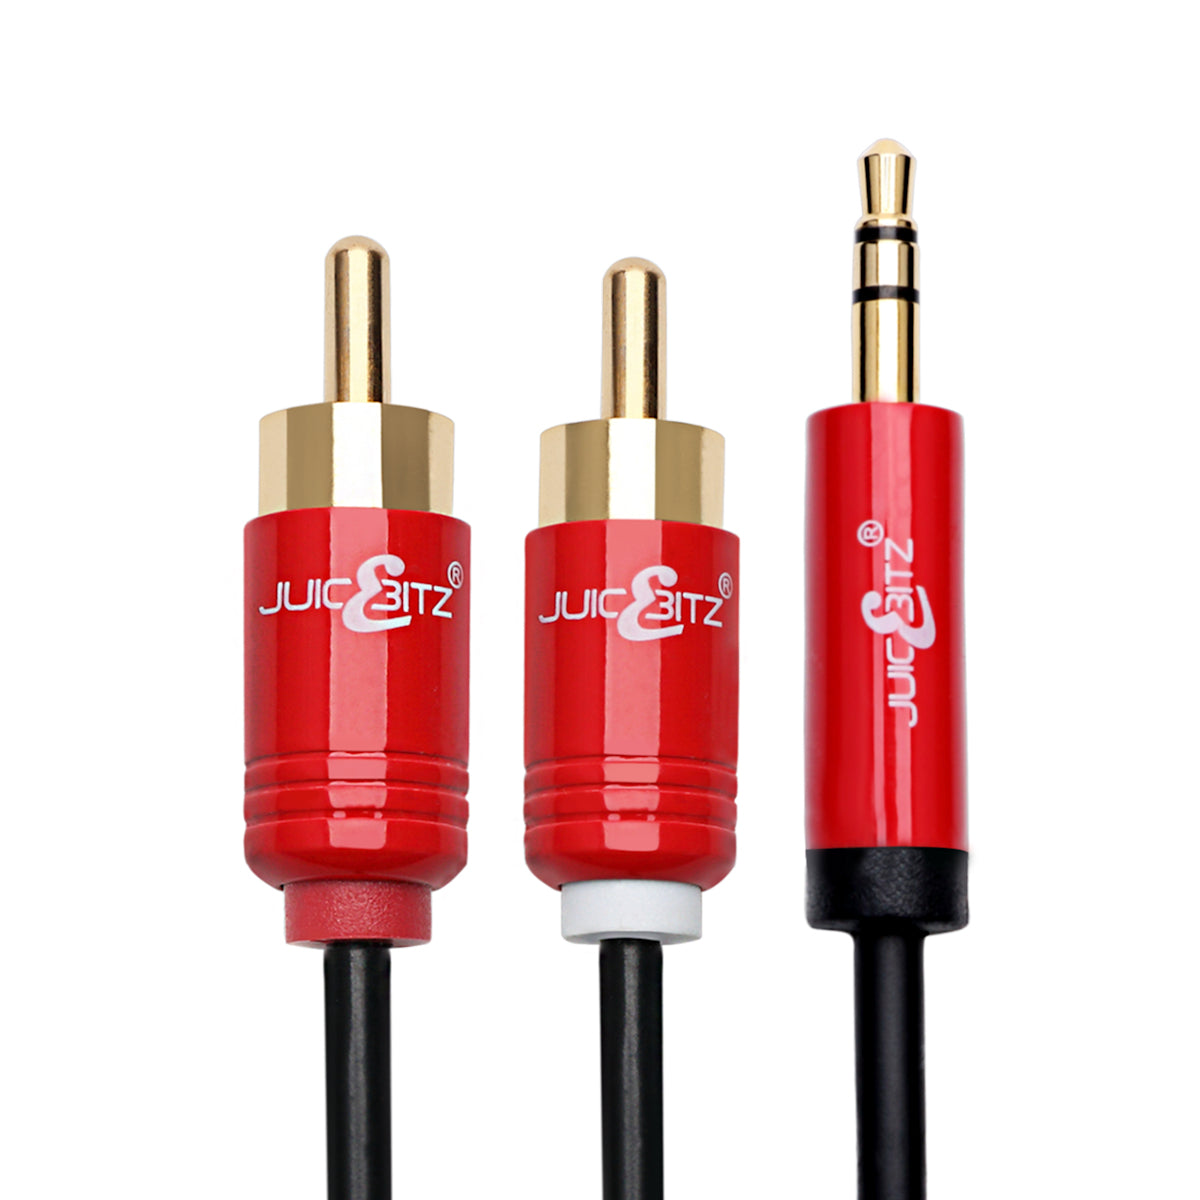 3.5mm Stereo Jack Plug to Twin RCA Male Shielded Phono Cable